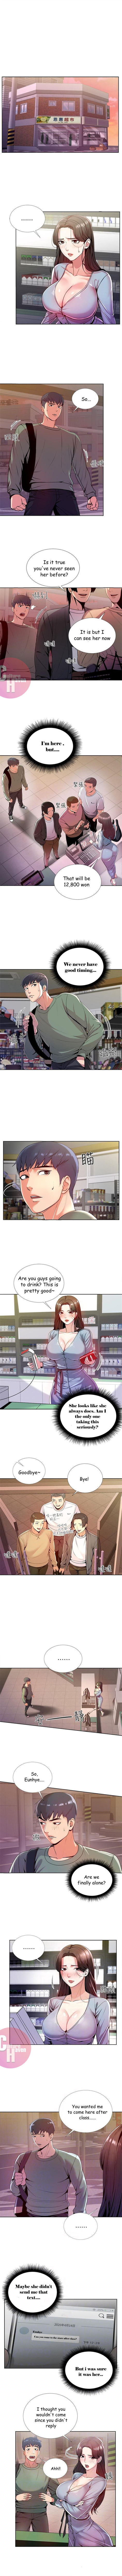 Eunhye’s Supermarket - Chapter 7 Page 1